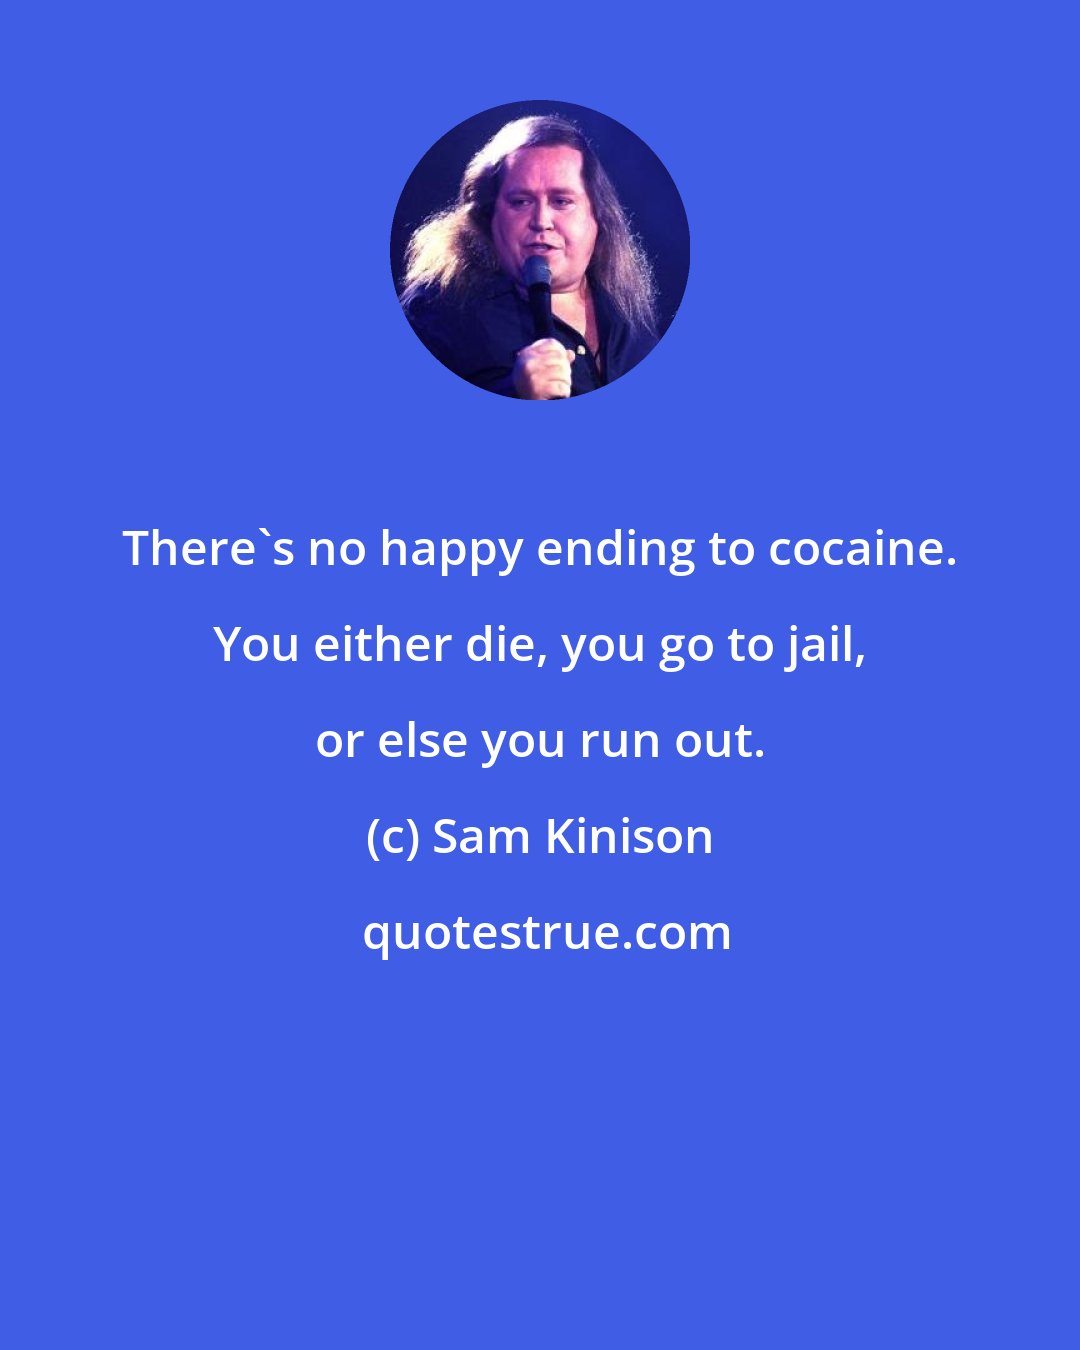 Sam Kinison: There's no happy ending to cocaine. You either die, you go to jail, or else you run out.